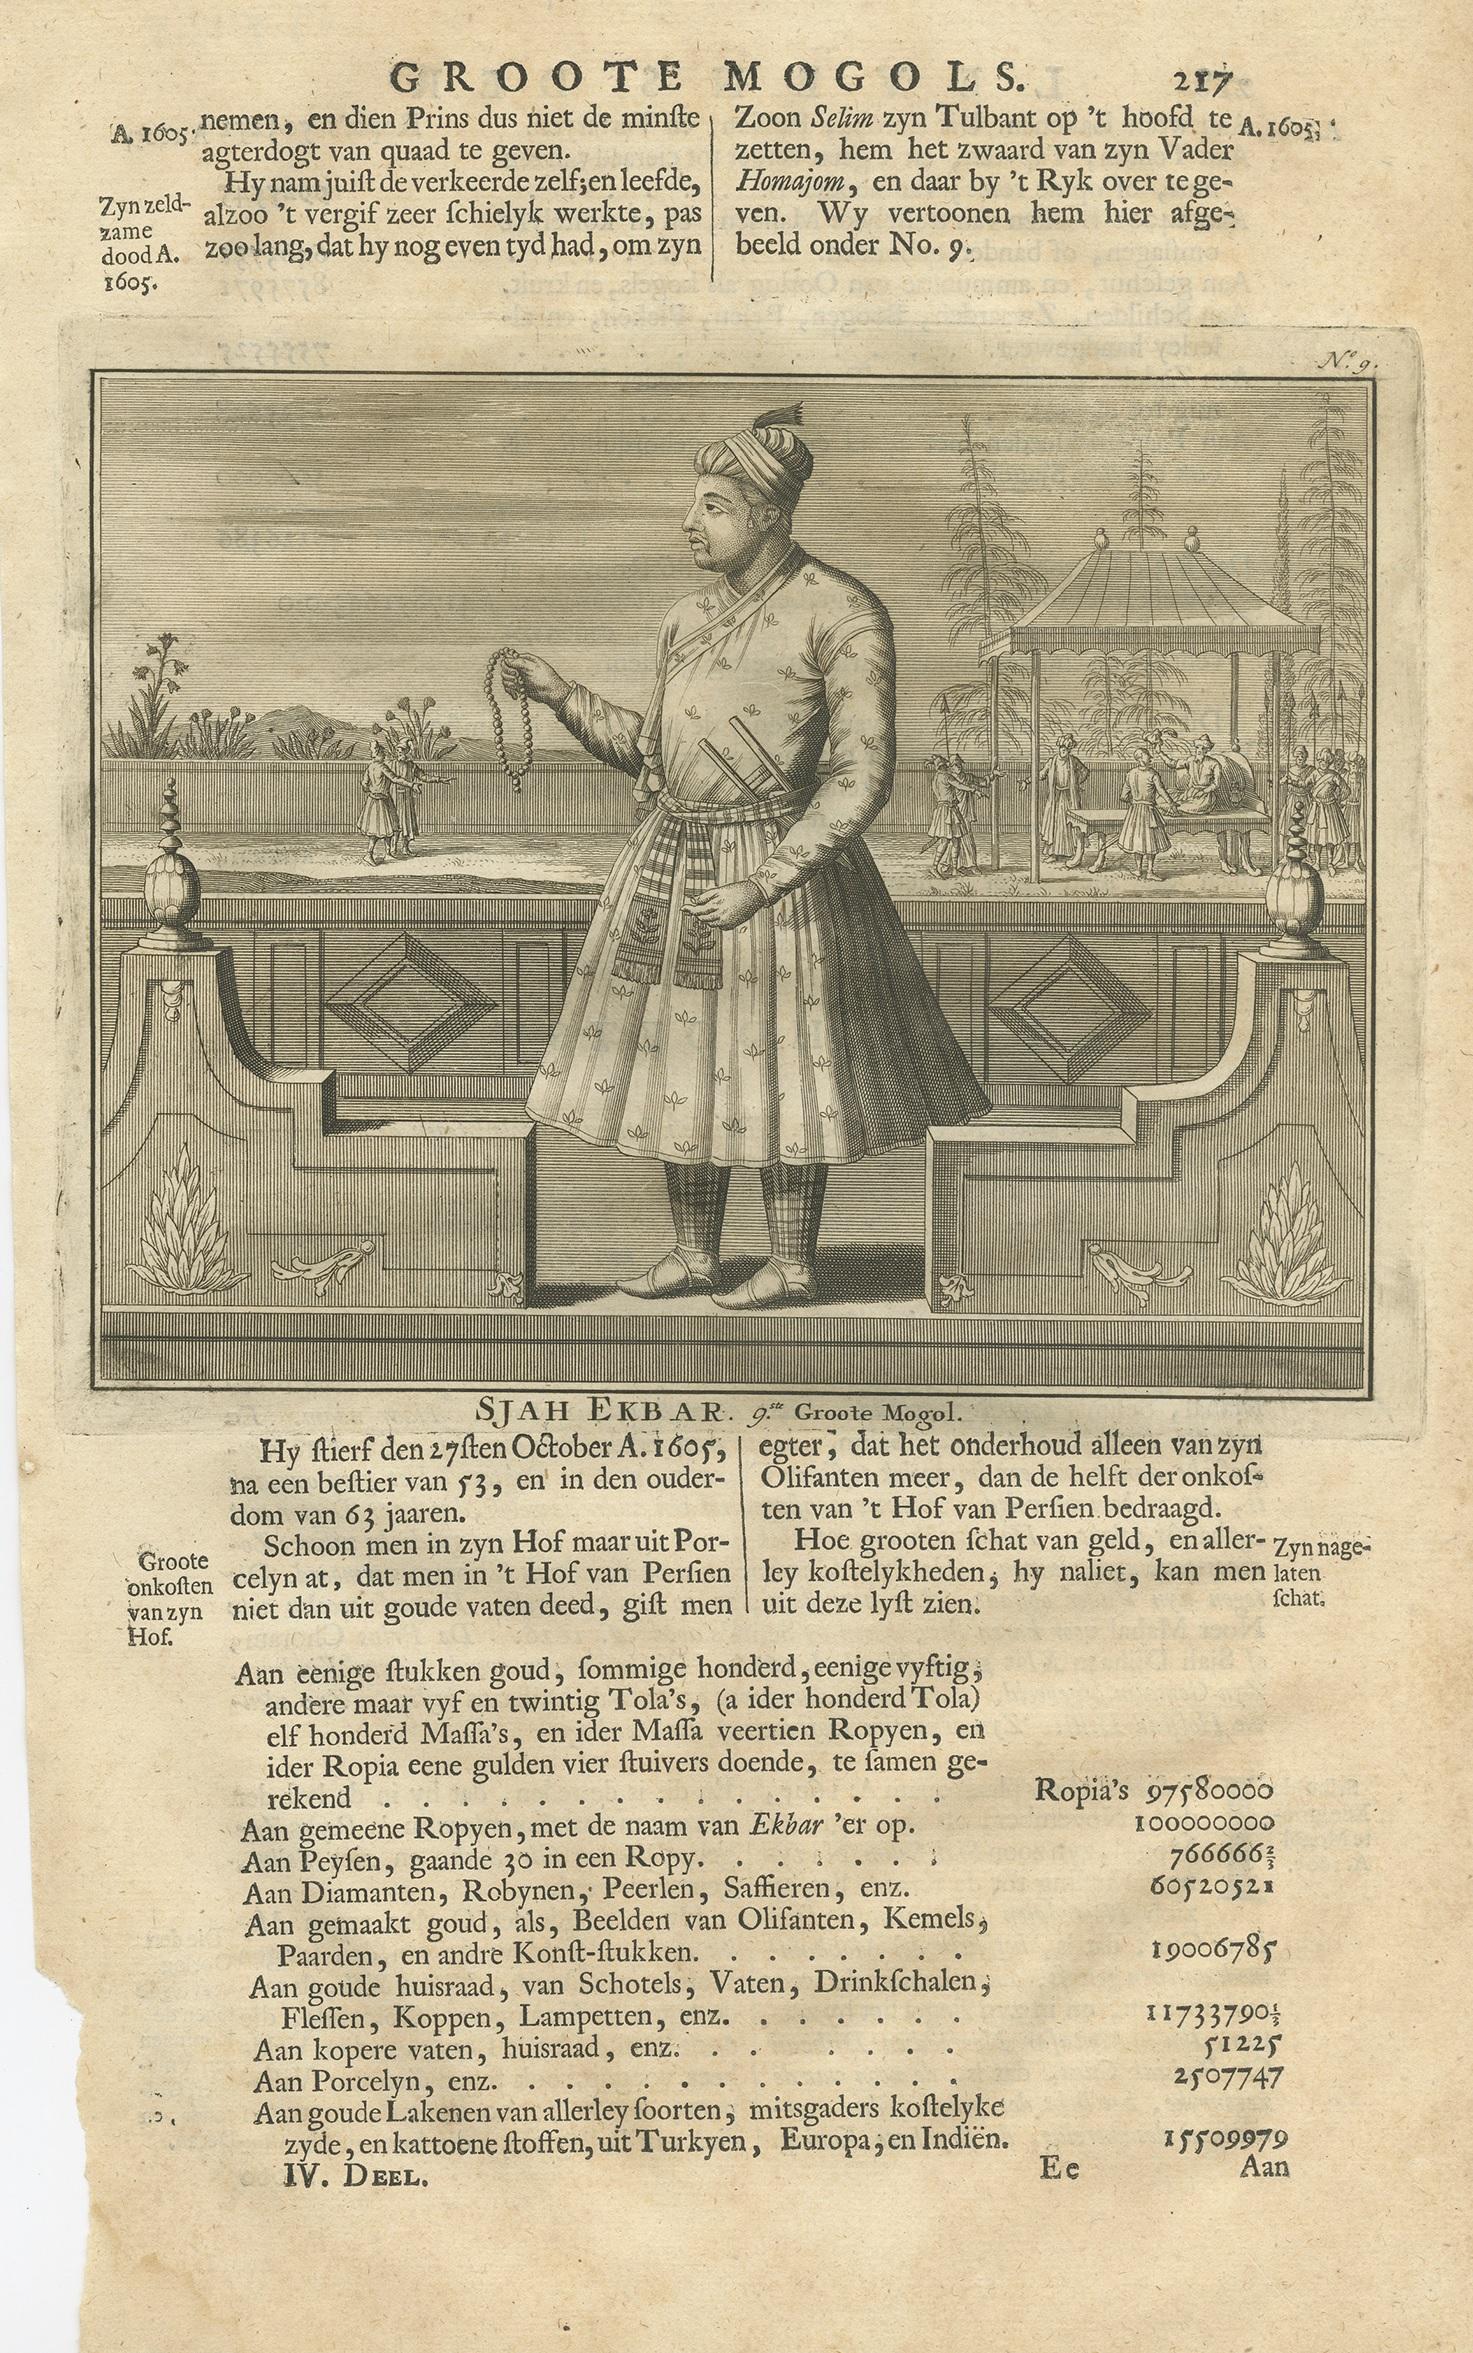 Antique print titled 'Sjah Ekbar, 9ste Groote Mogol'. This print depicts Farrukhsiyar, the 9th Mughal Emperor. Text on verso. This print originates from 'Oud en Nieuw Oost-Indiën' by F. Valentijn.